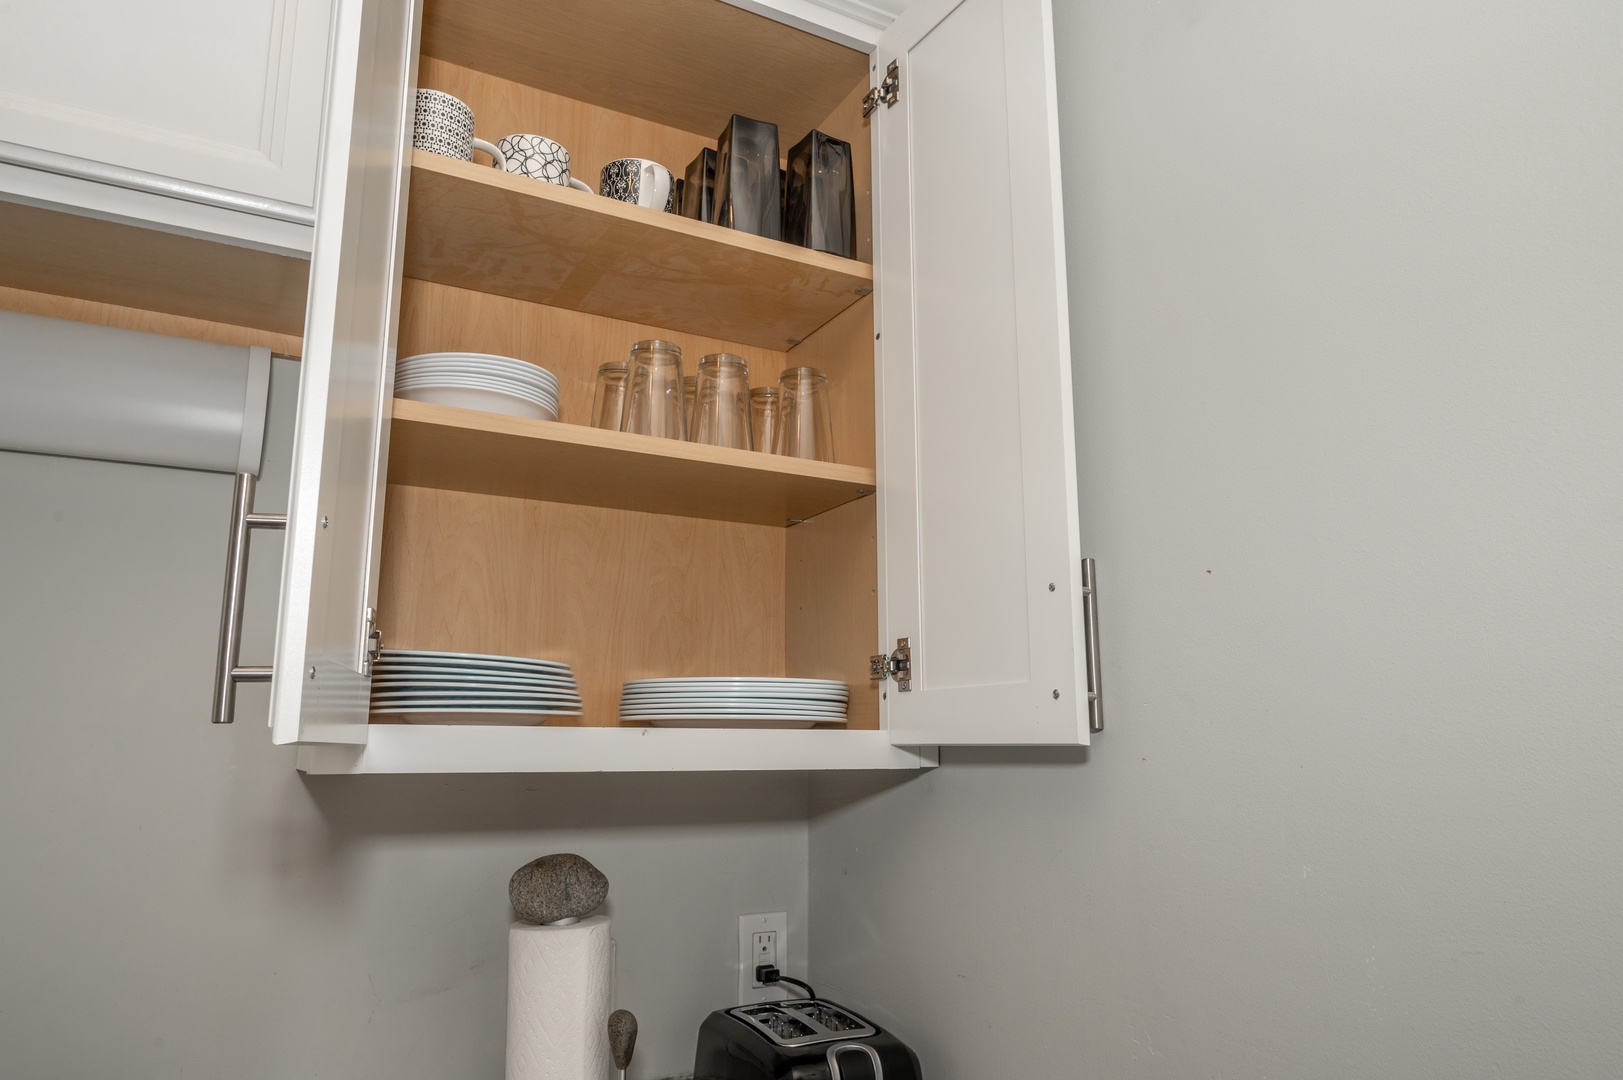 This condo is equipped with dishes, glassware, and mugs